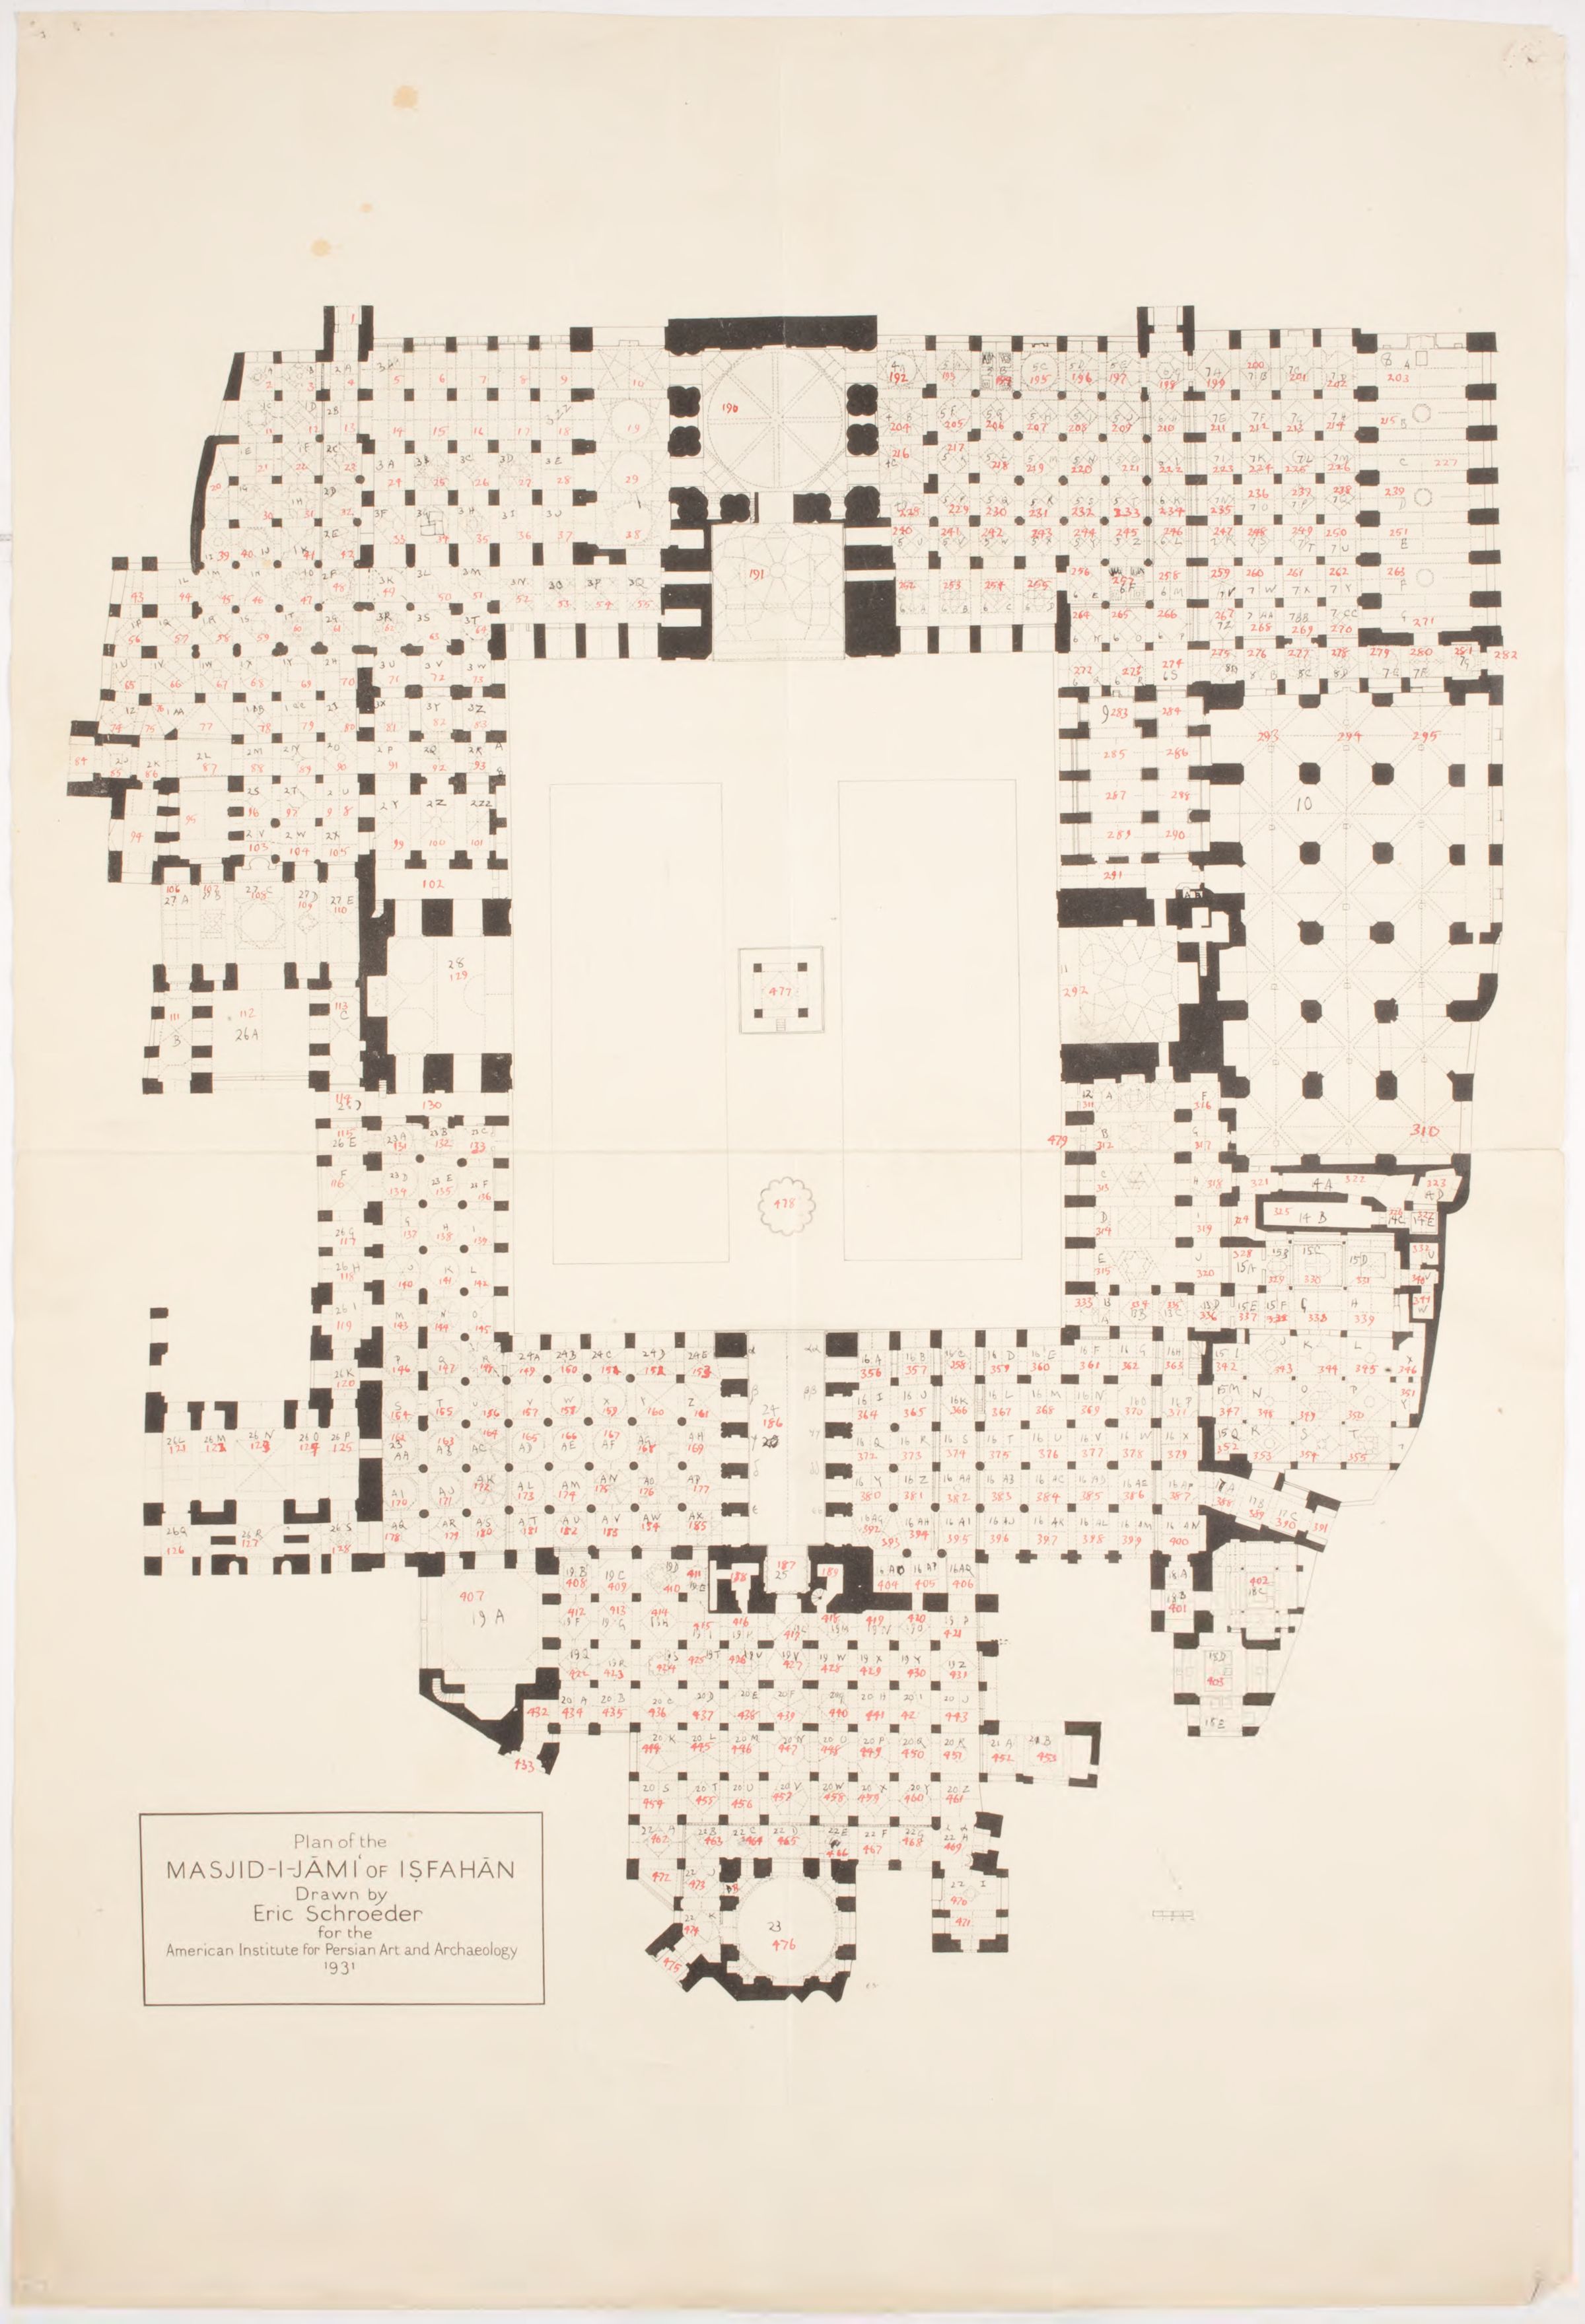 Masjid-i Jami' (Isfahan) - <p>Ground floor plan made by Eric Schroeder for Arthur Upham Pope in 1931, with bays and other covered spaces numbered.</p>